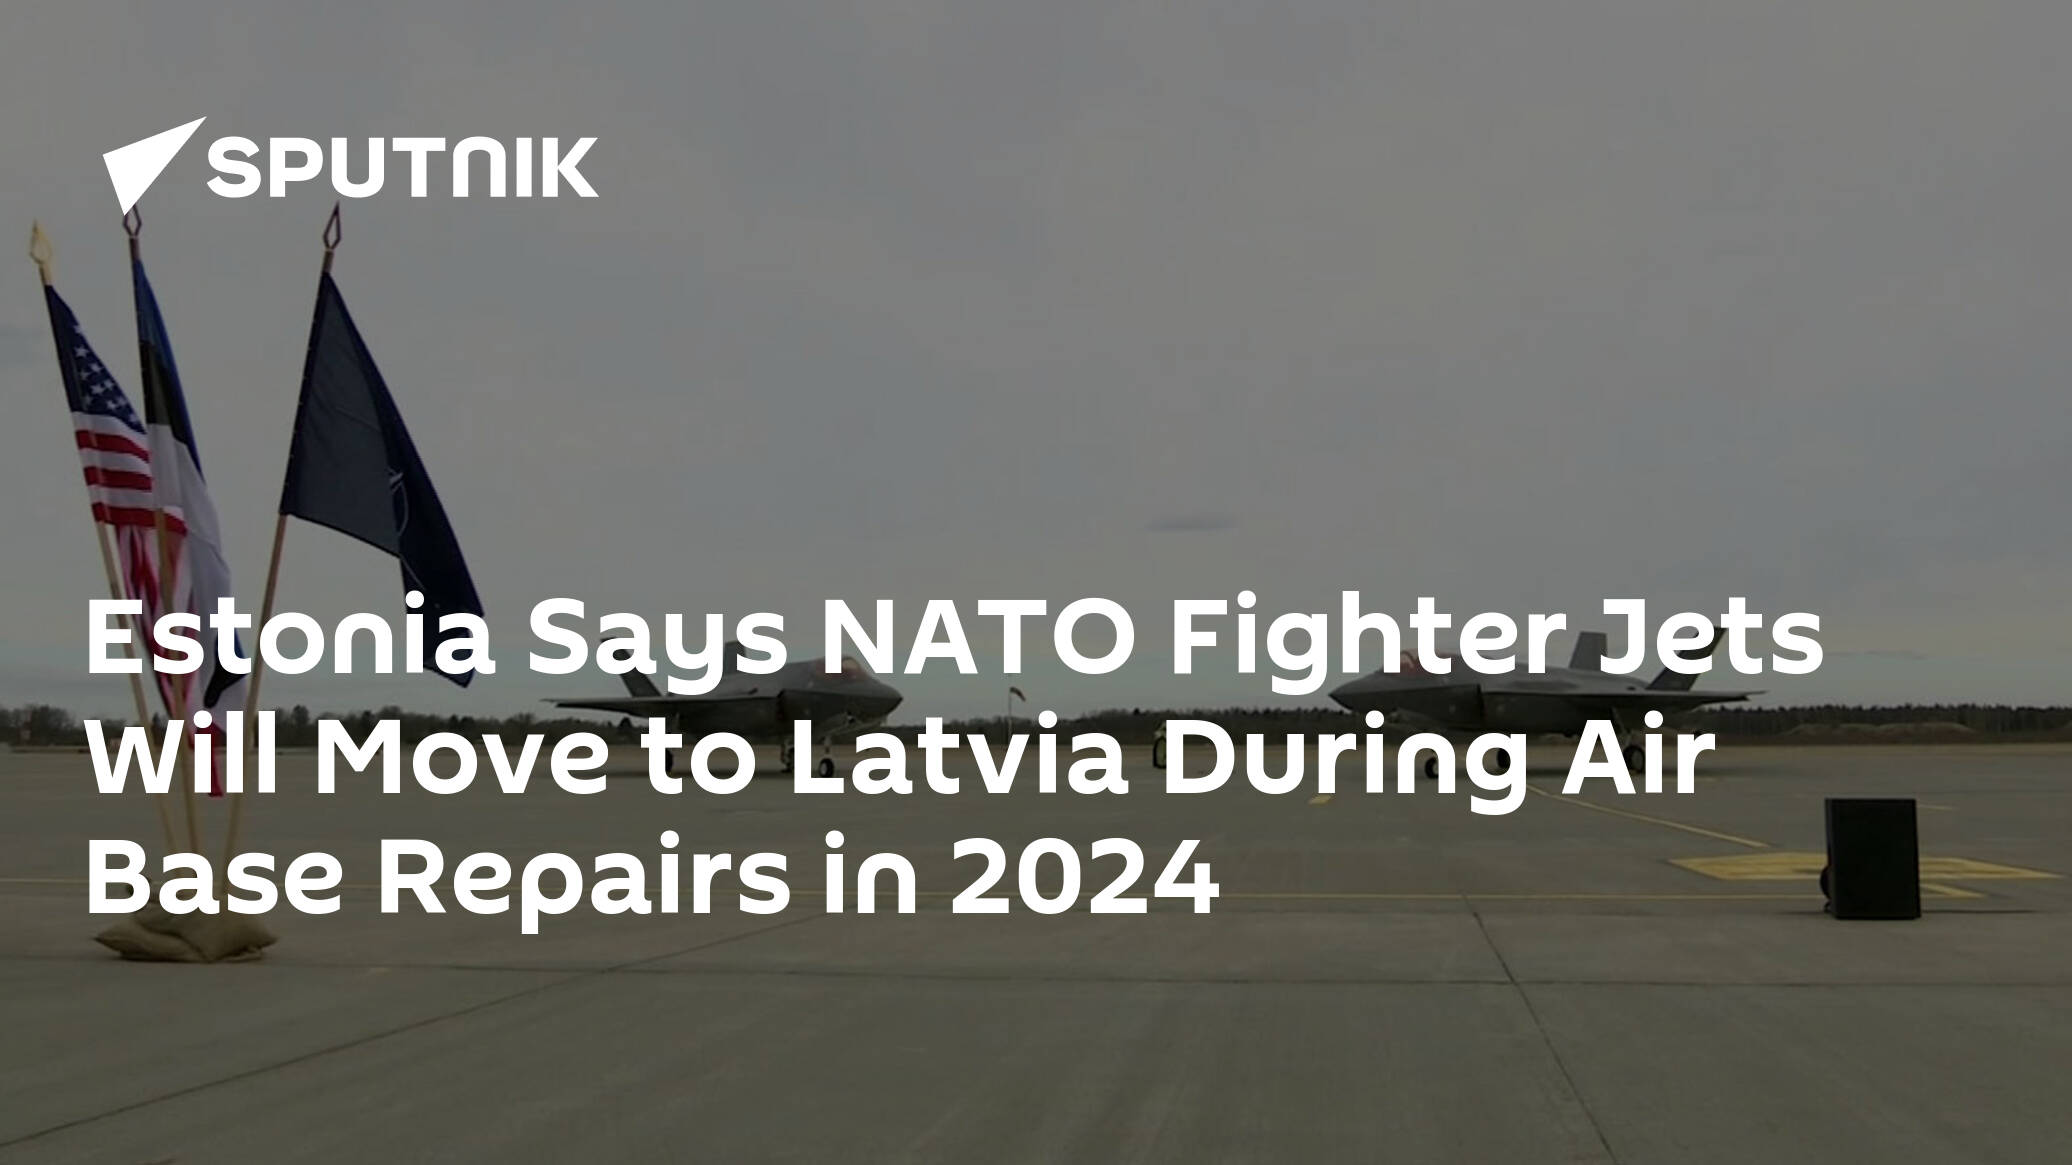 Estonia Says NATO Fighter Jets Will Move to Latvia During Air Base Repairs in 2024